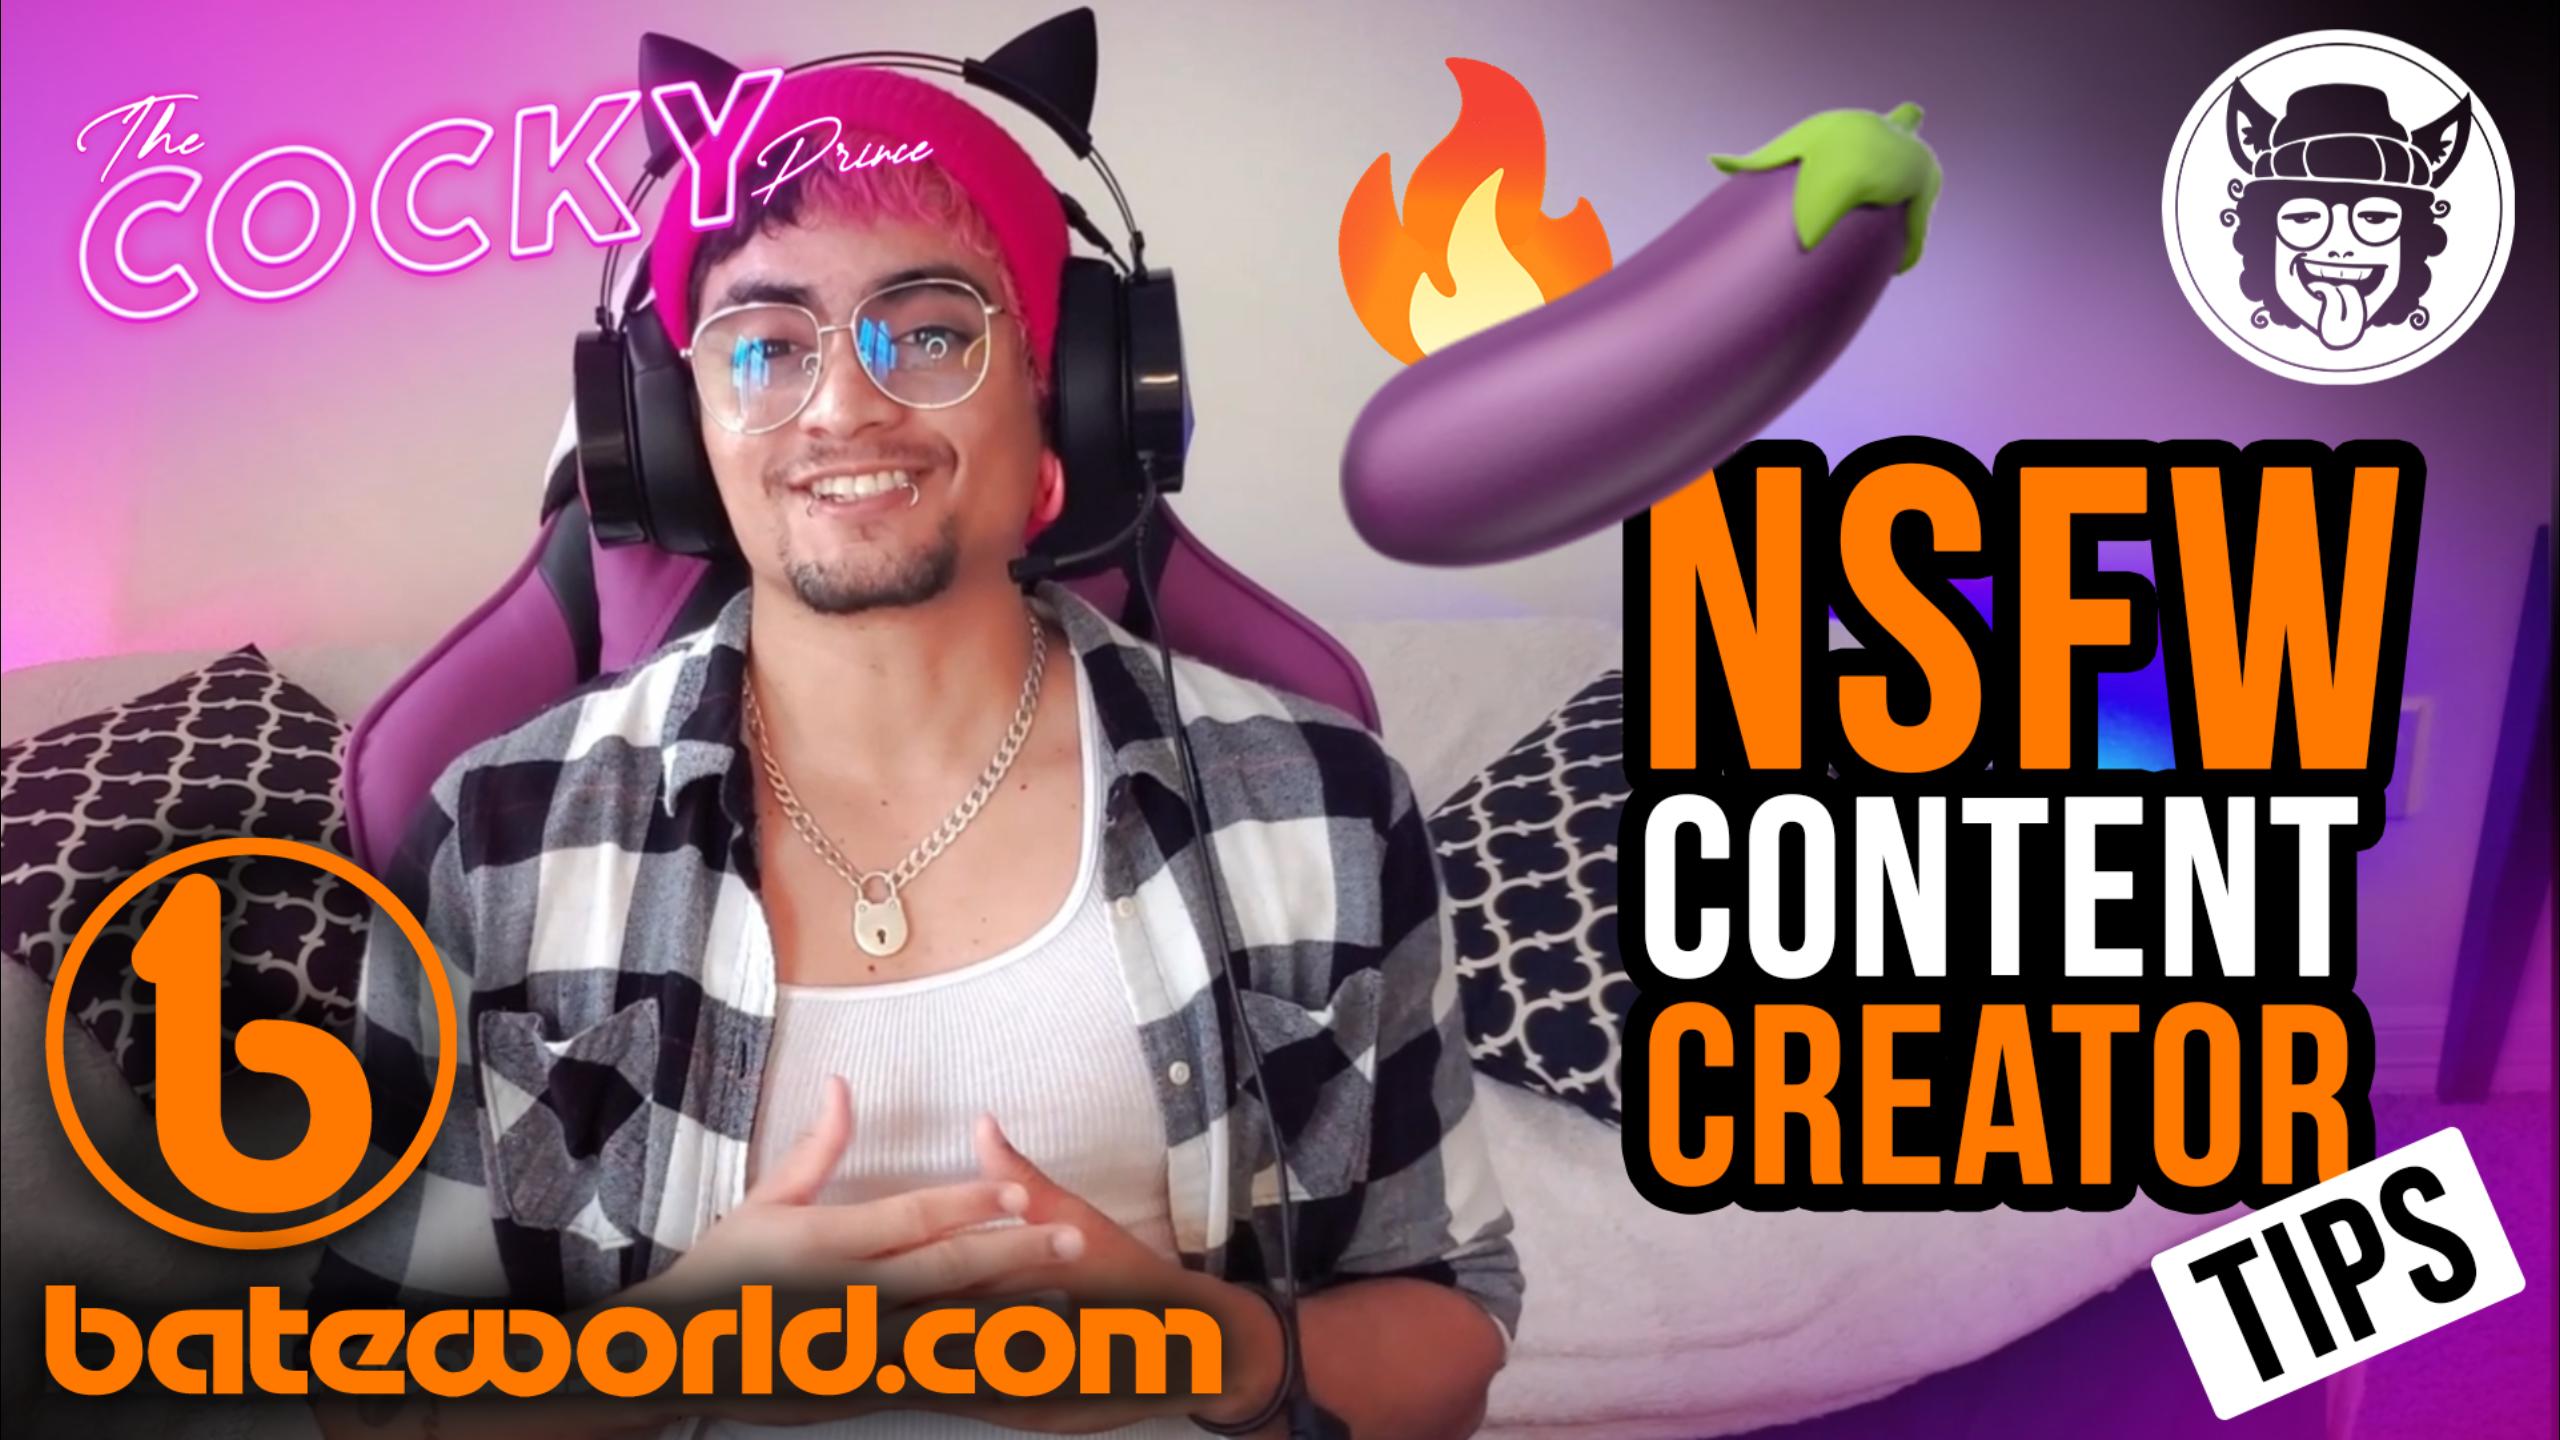 How To Make Your NSFW Content Visually Engaging